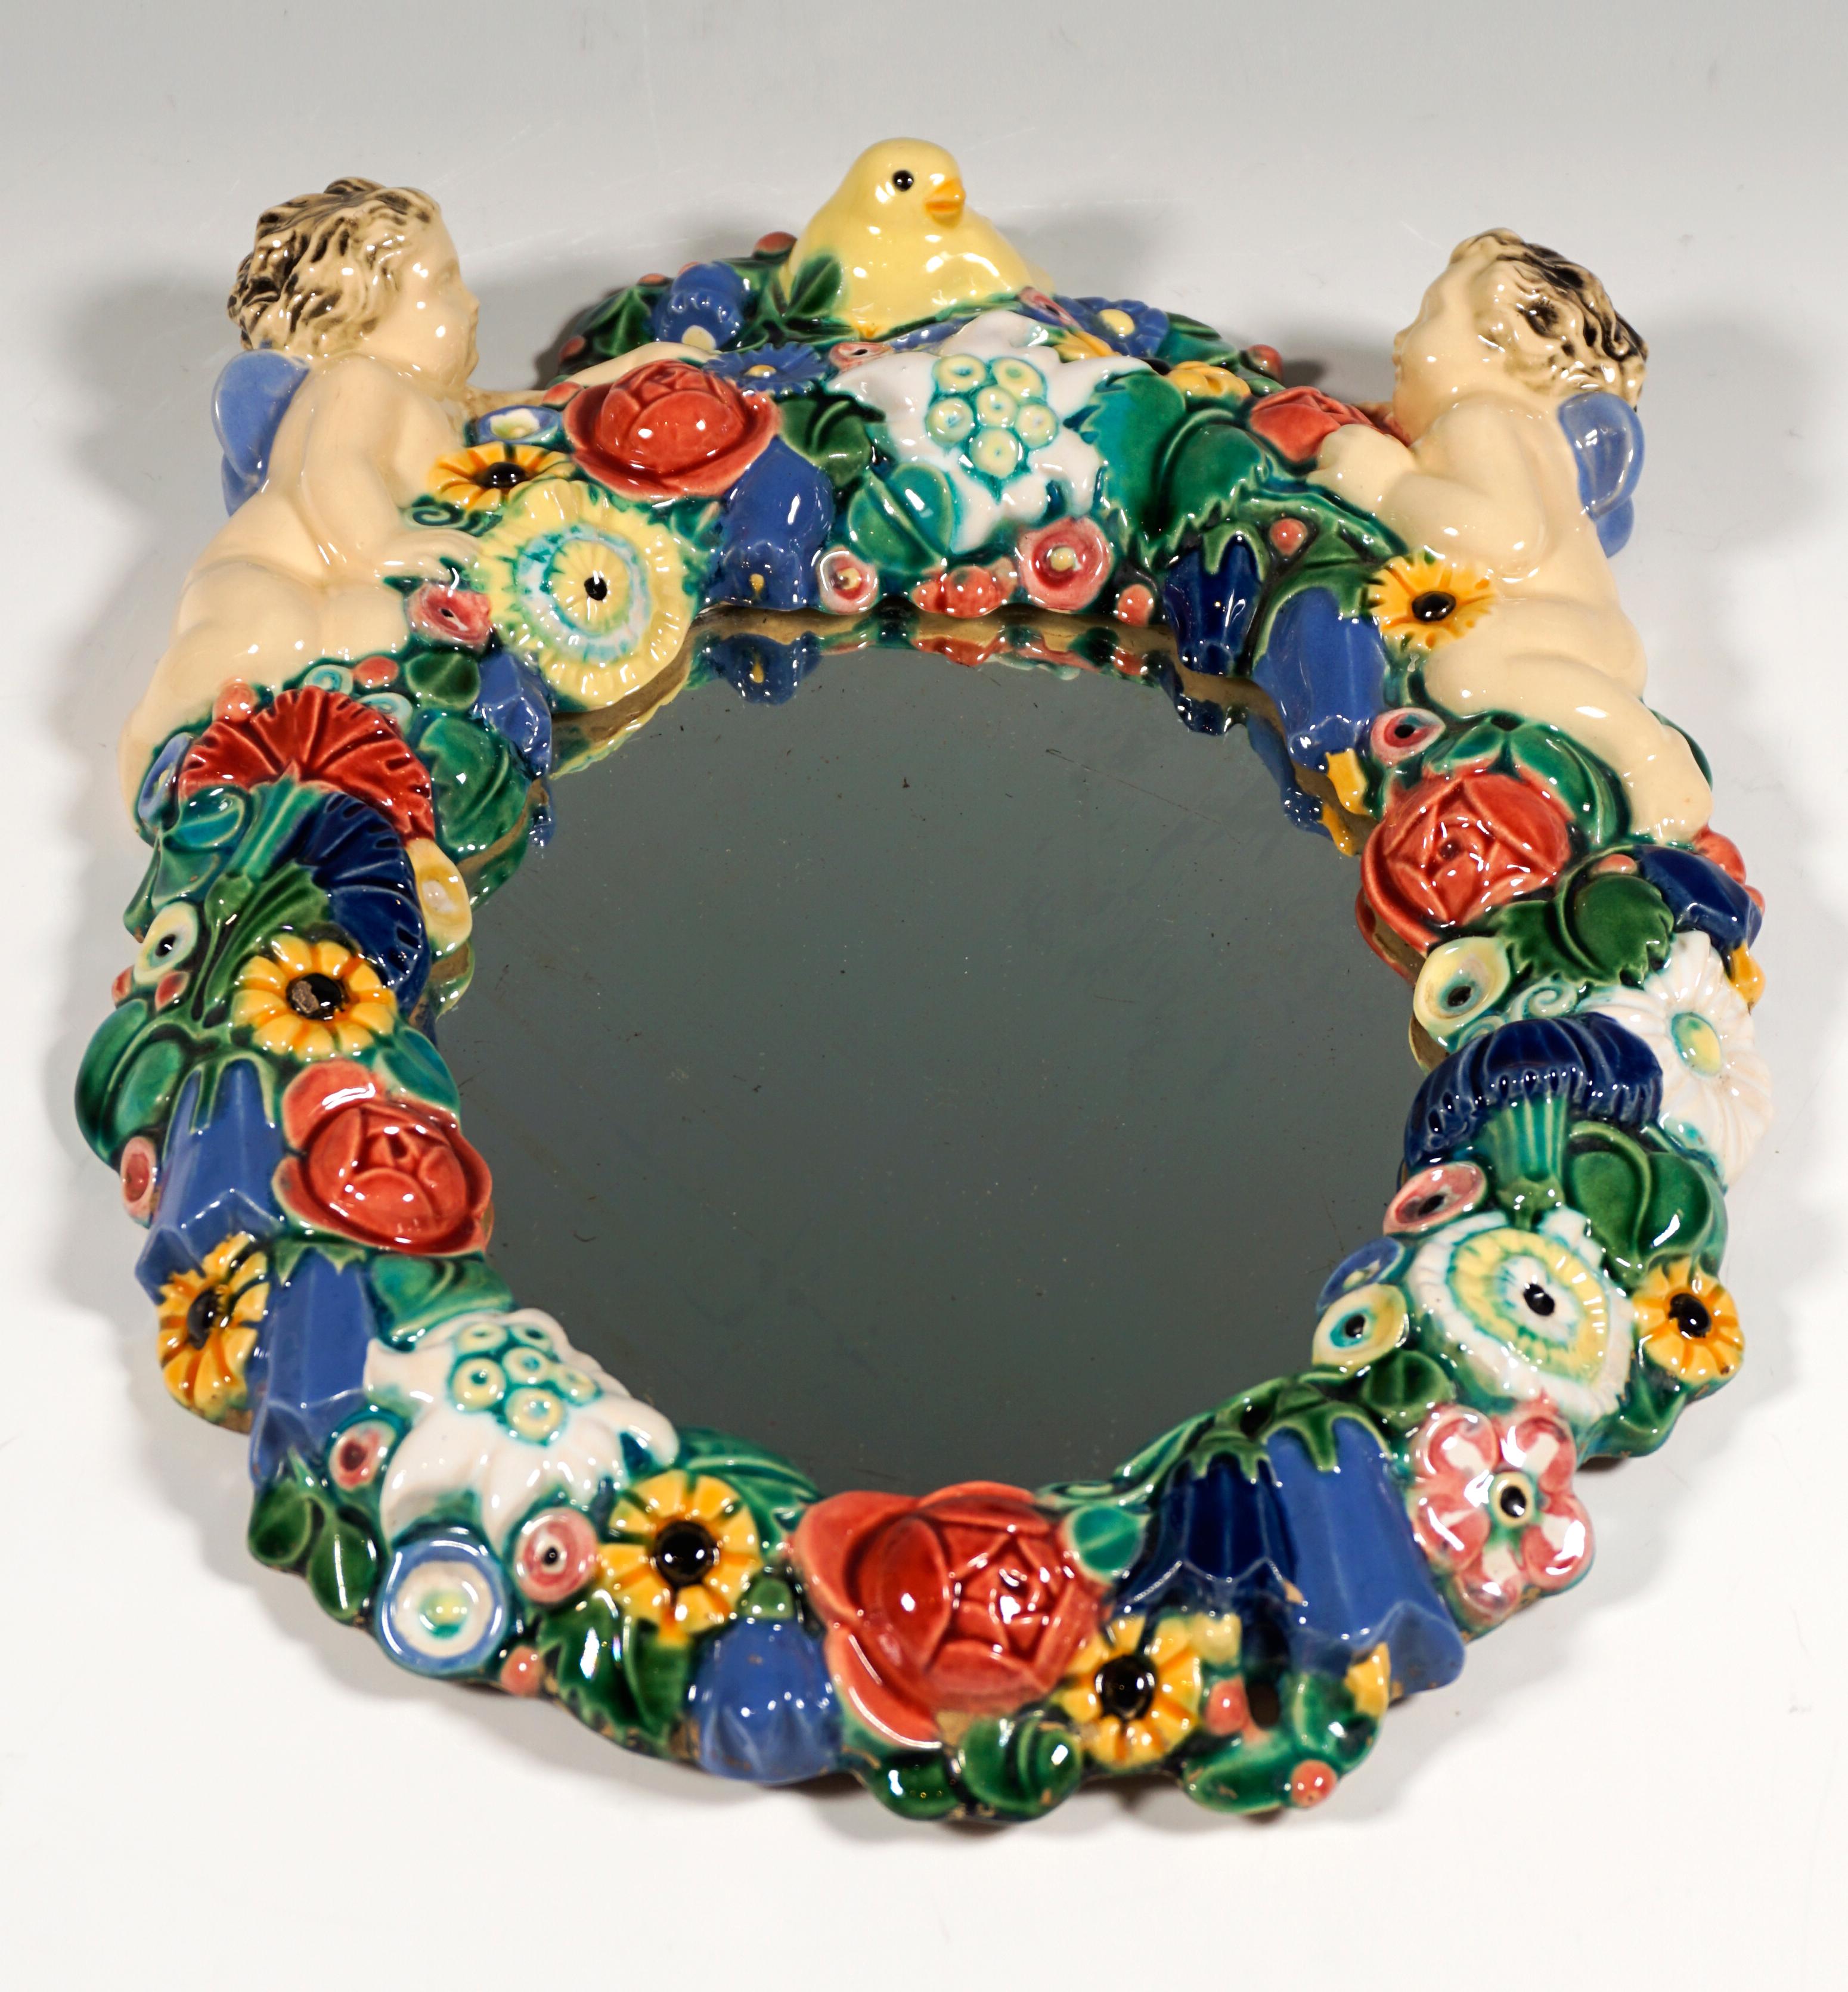 Oval mirror framed by a dense coloured floral wreath formed of ceramic, on the upper rim two winged putti, between them a bird in the middle.

By Michael Powolny (1871 - 1954)
Nowadays, art experts attest Michael Powolny’s work as the work of one of